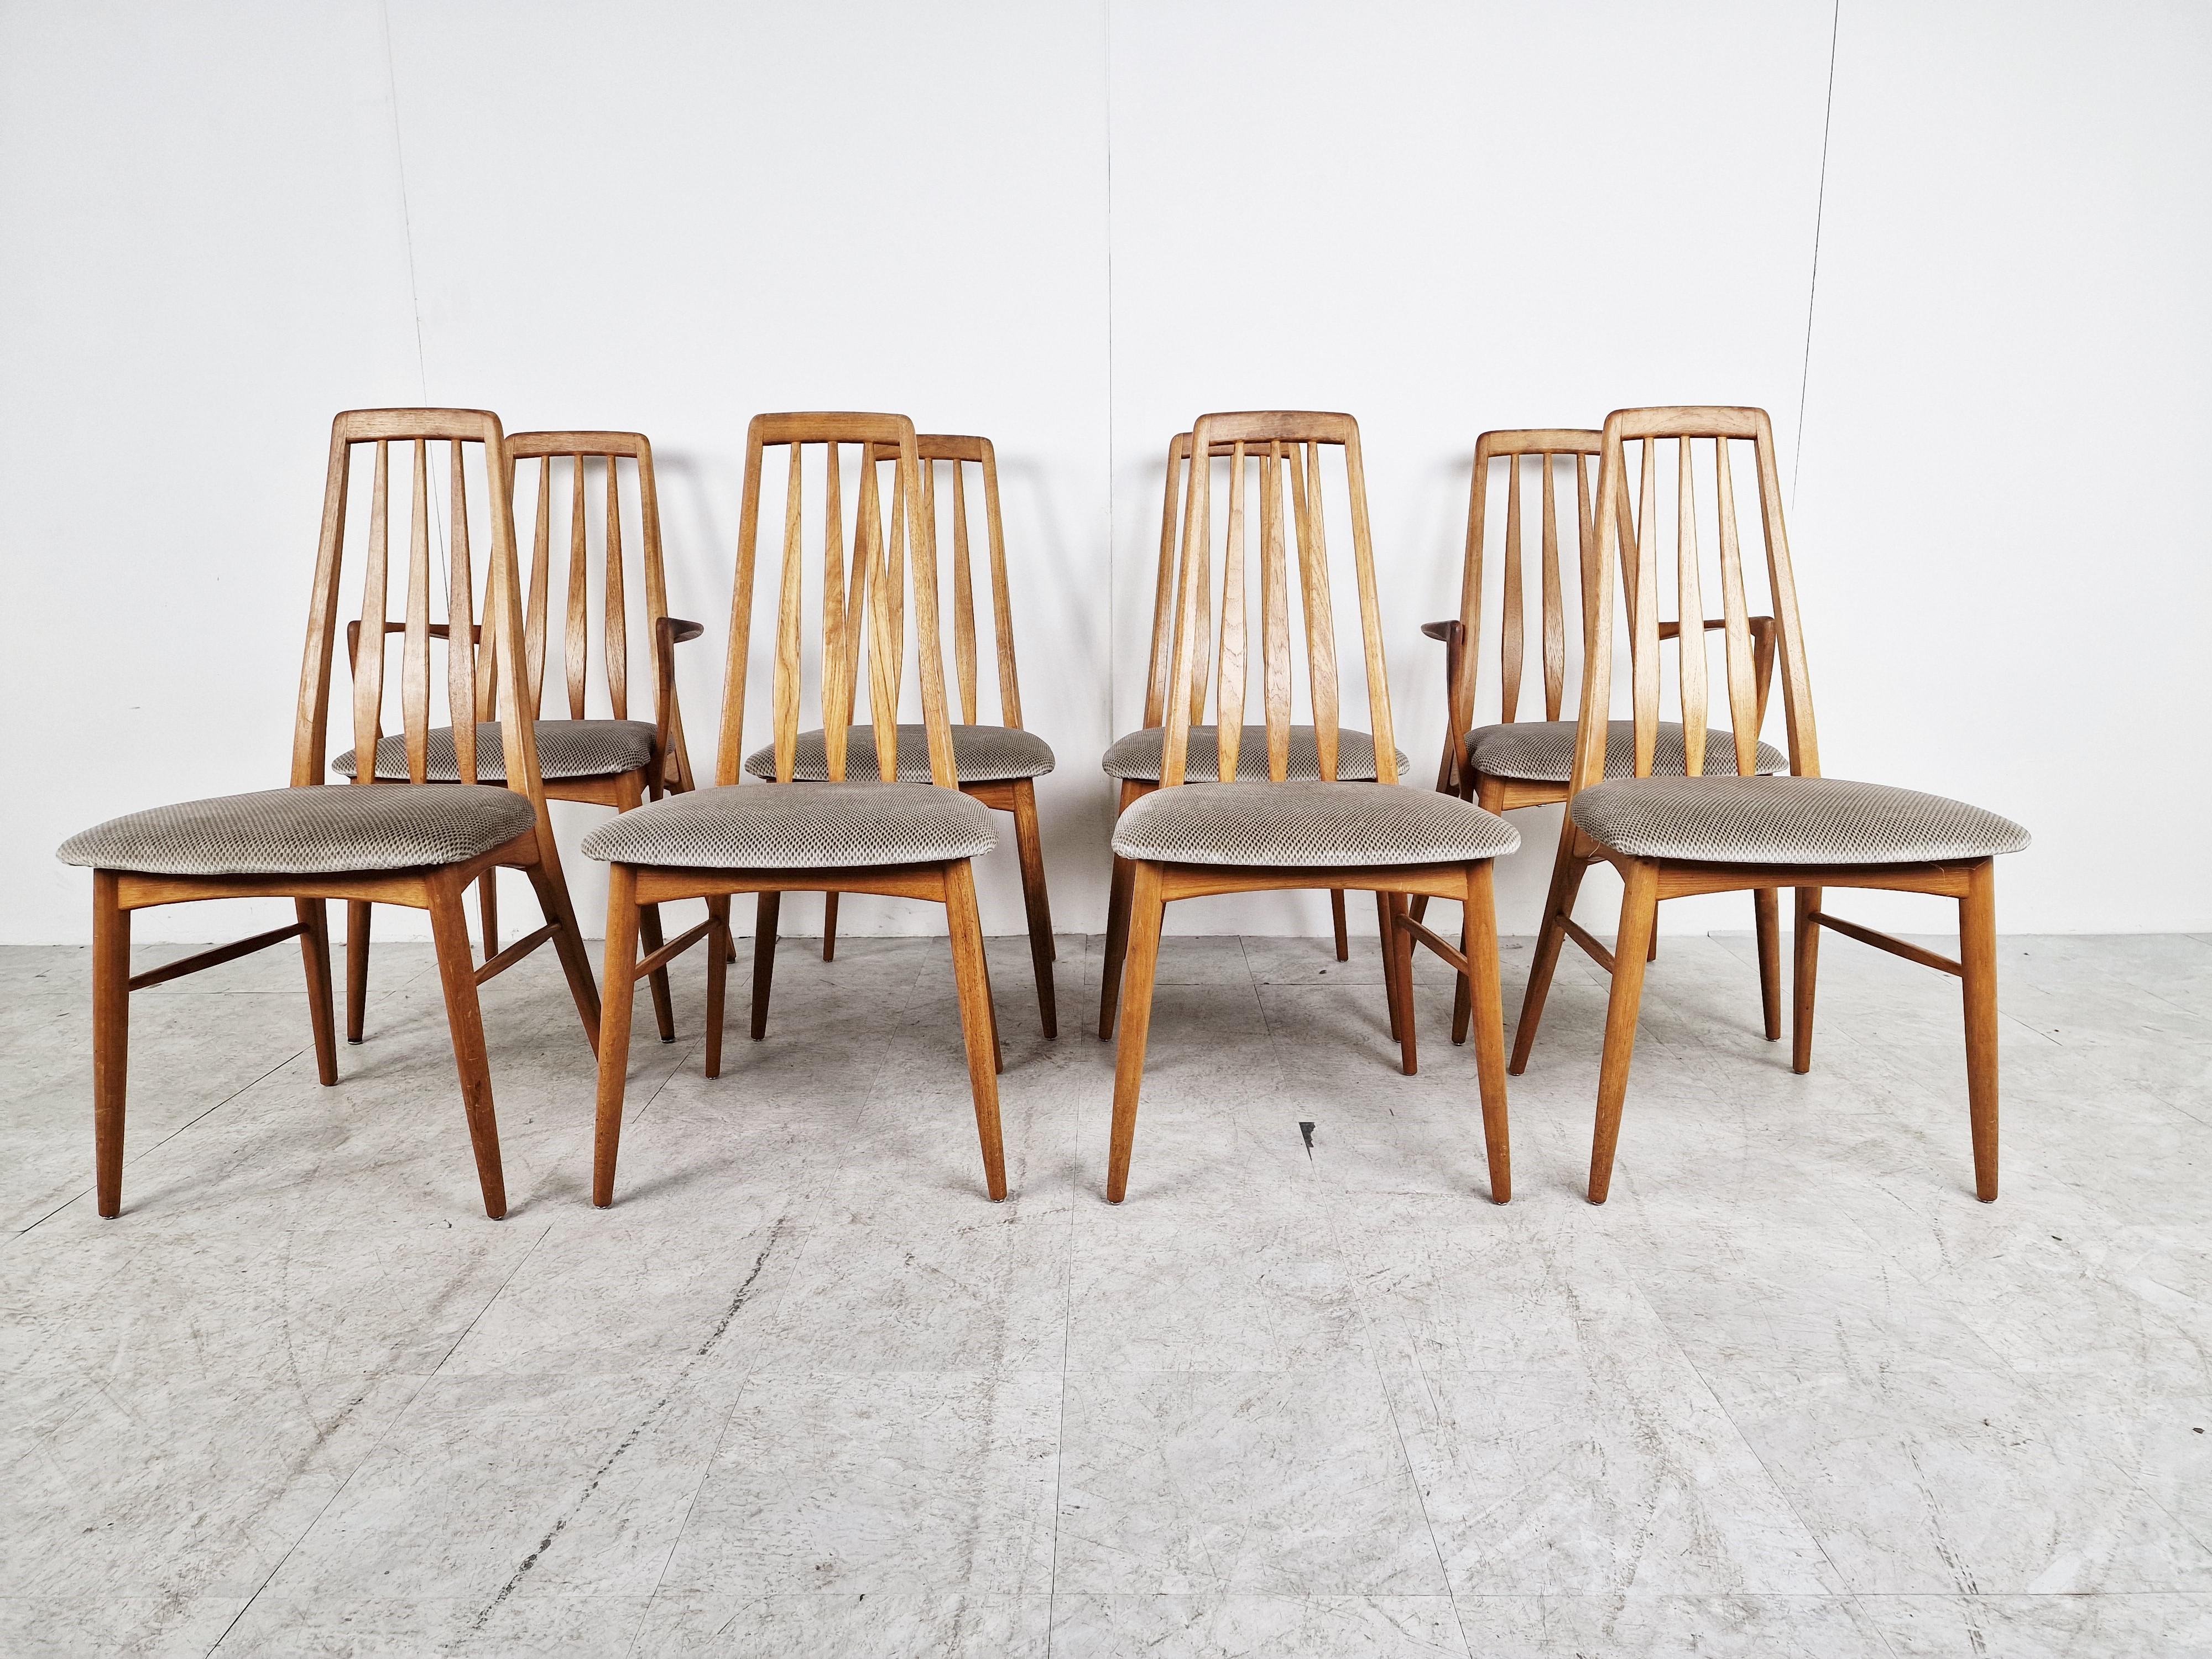 Mid-20th Century Set of 6 dining chairs, model EVA by Niels Kofoed, Denmark